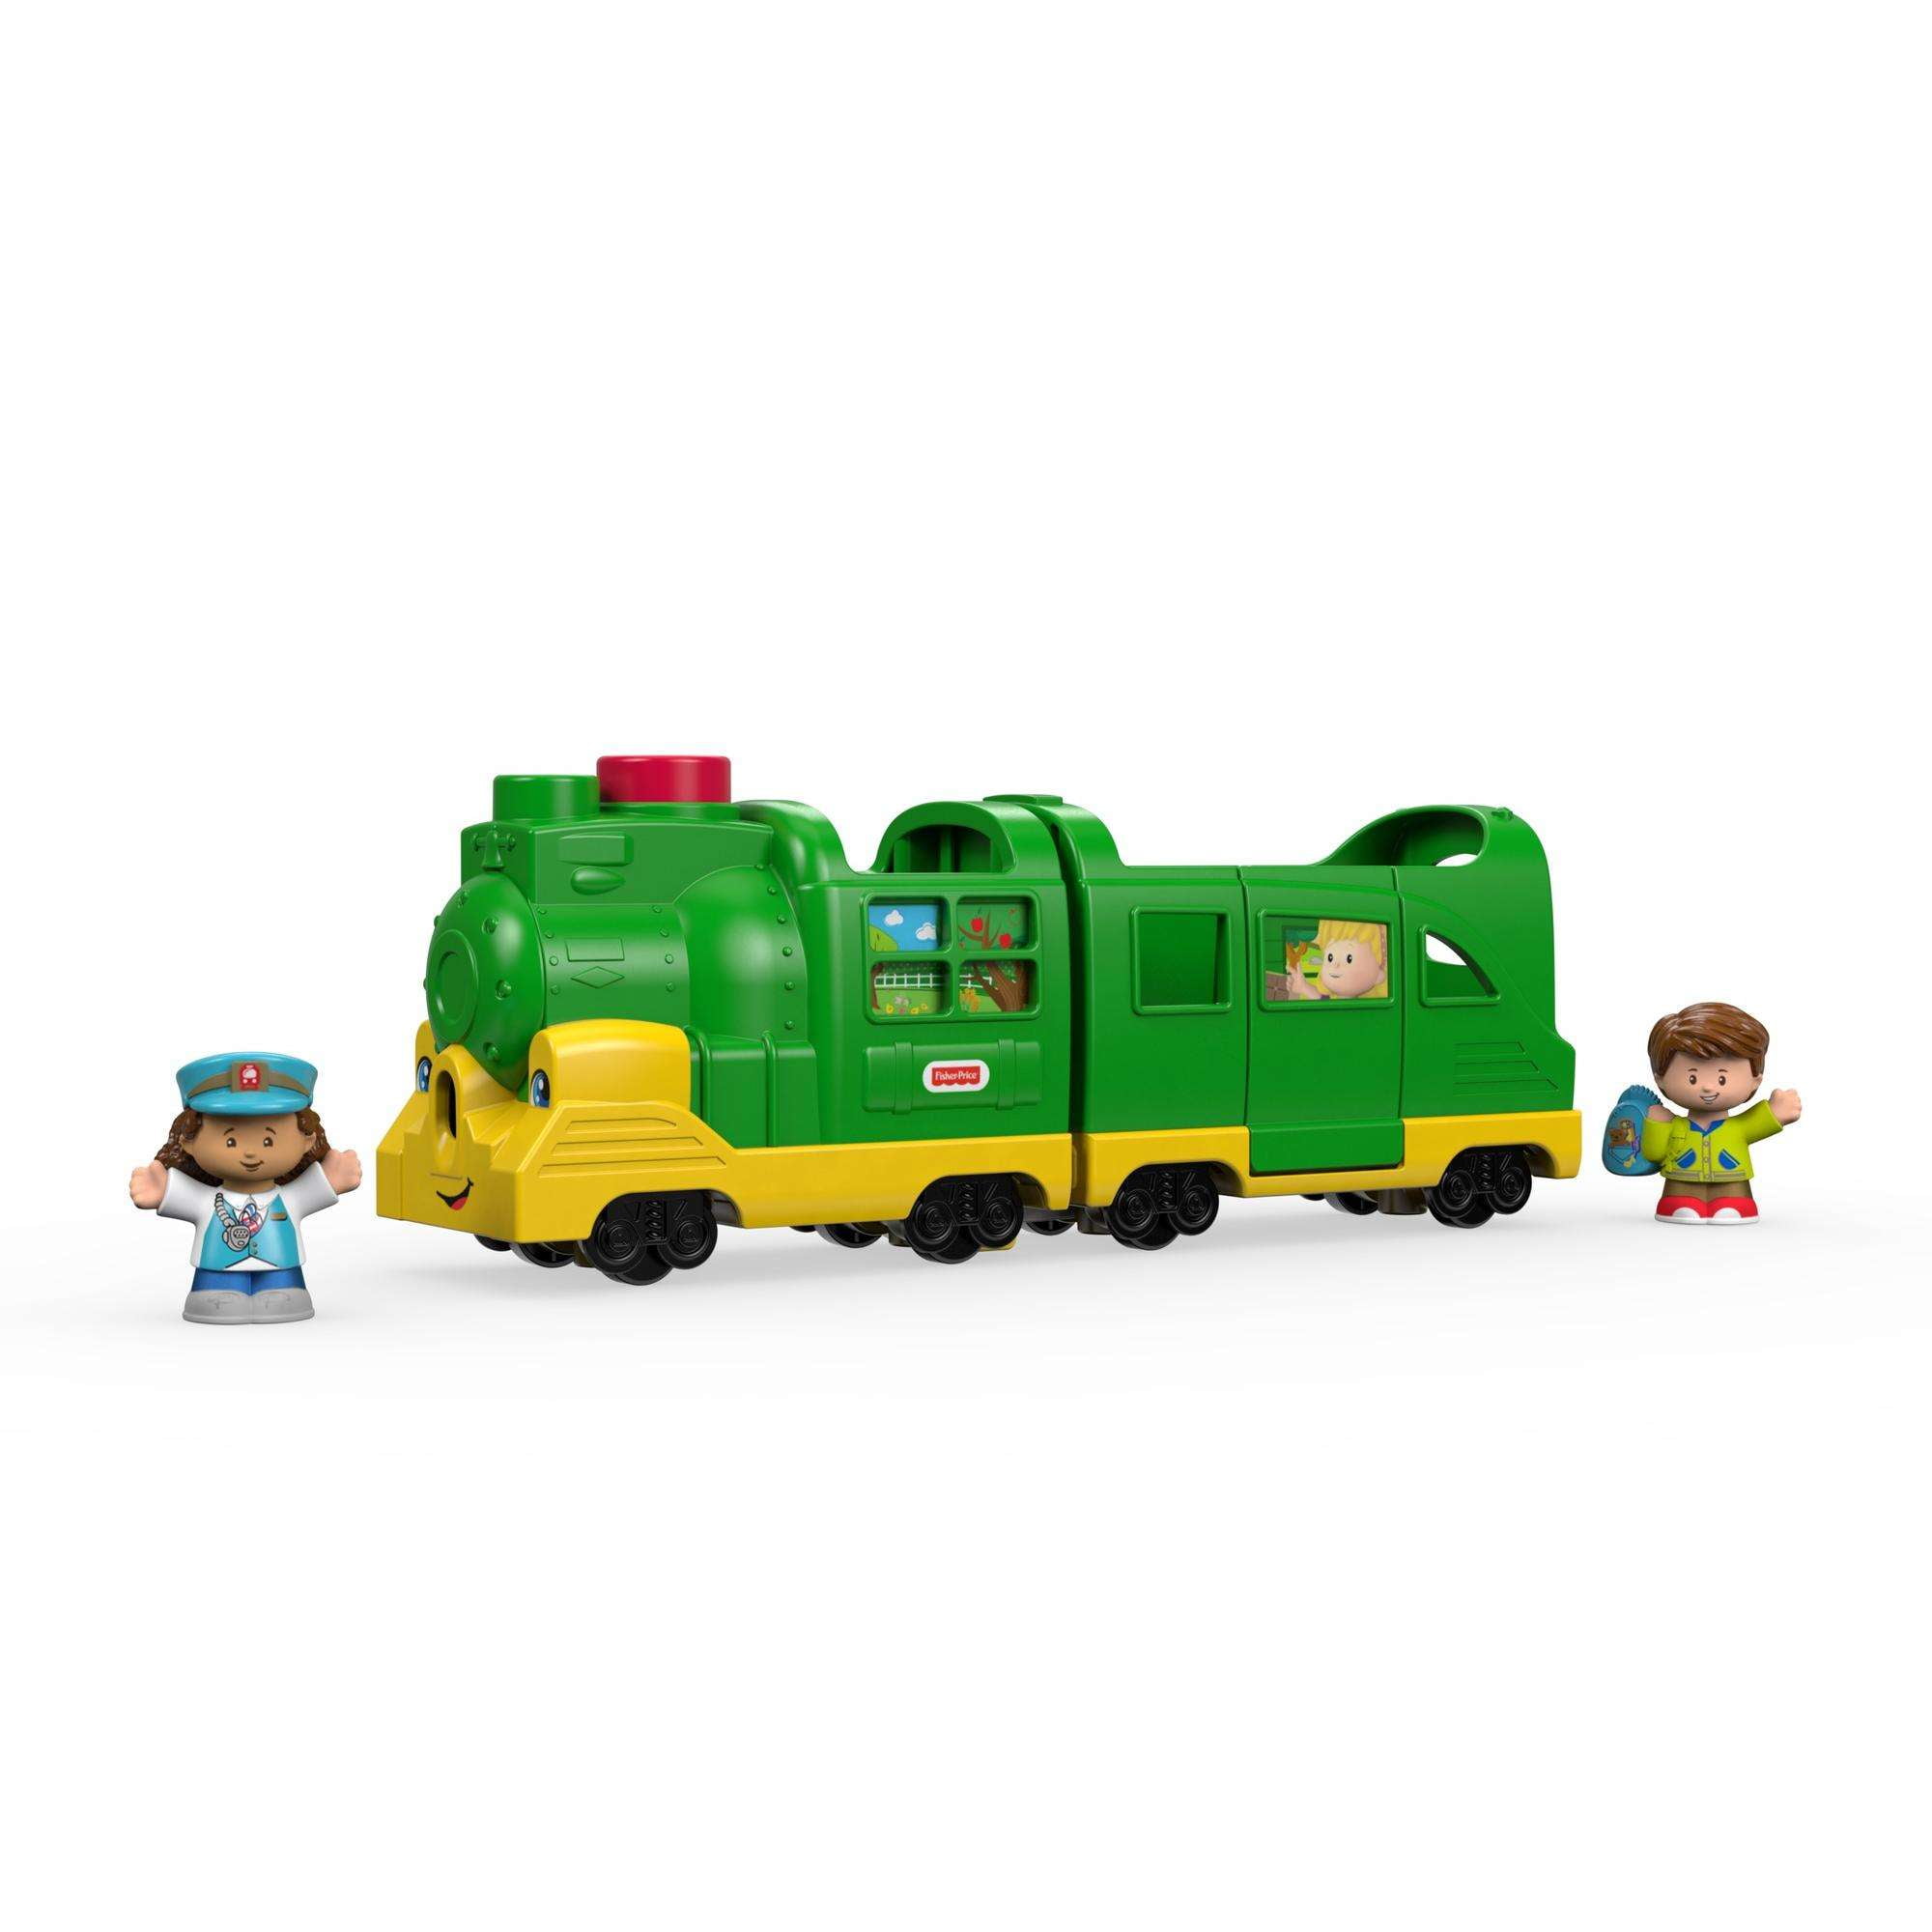 Little People Friendly Passengers Train With Sounds Phrases for sale online 